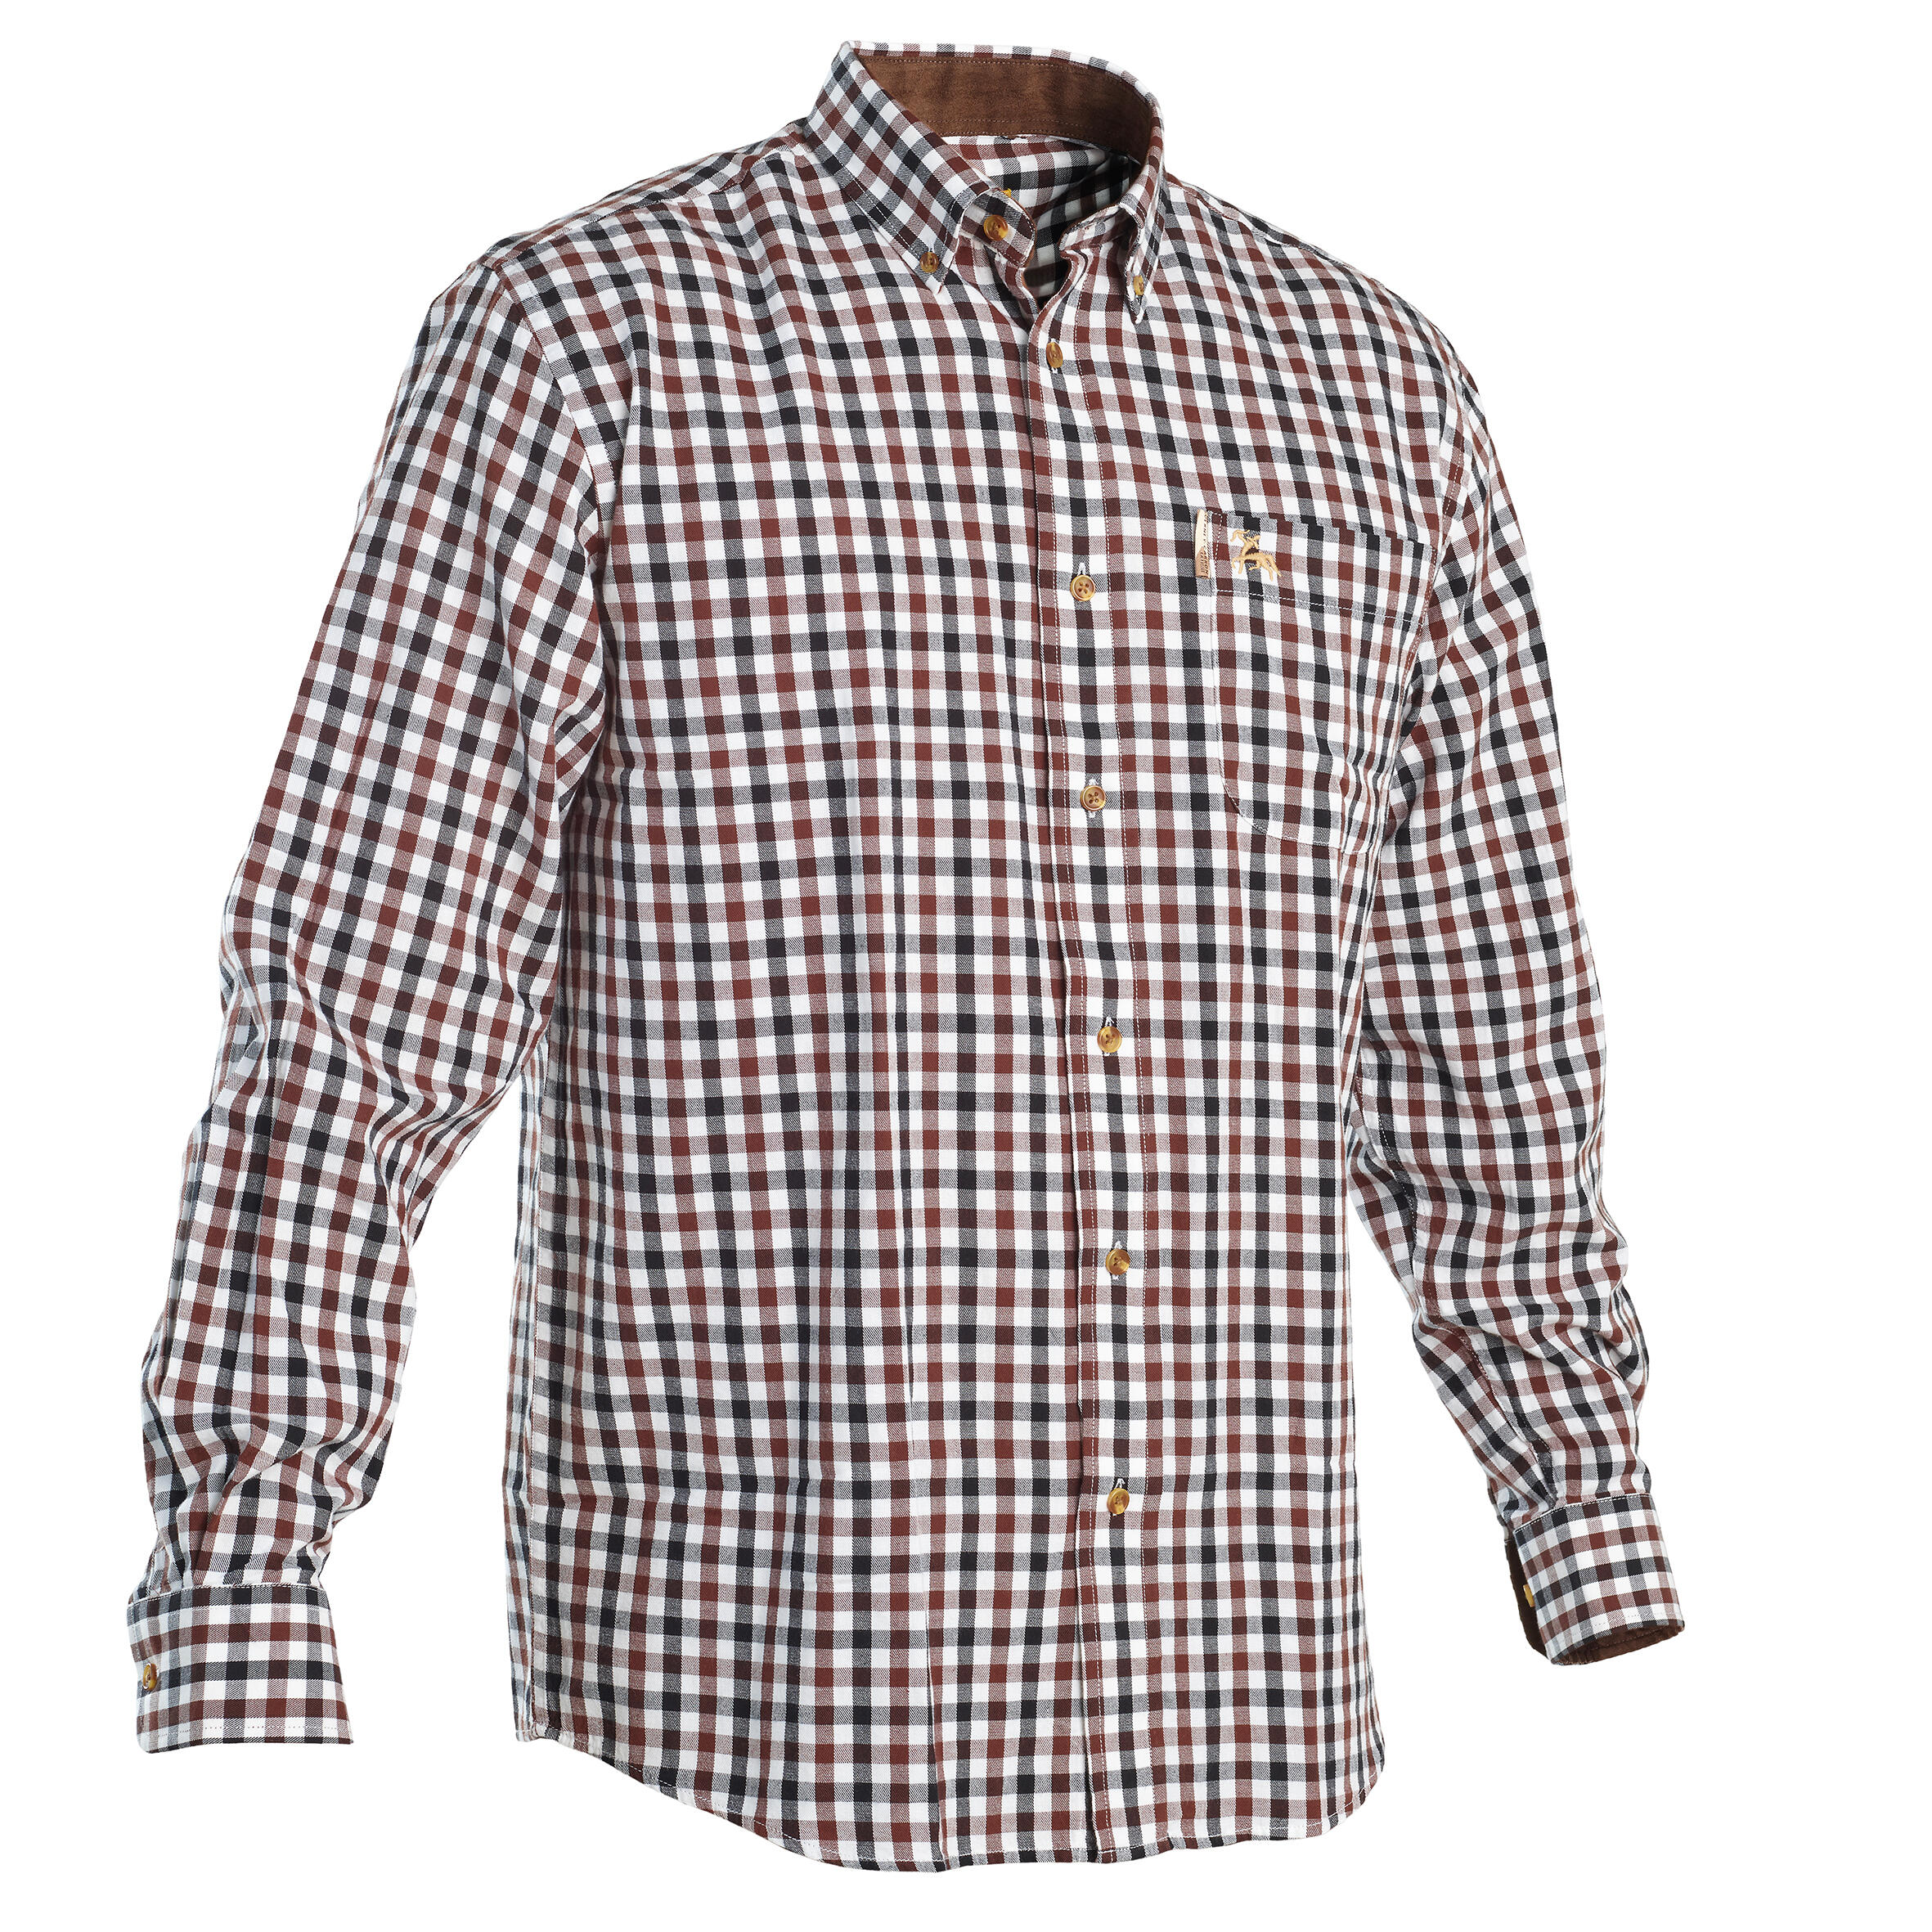 LIGNE VERNEY-CARRON Long-Sleeved Checked Cotton Country Sport Shirt Brown Black Verney Carron